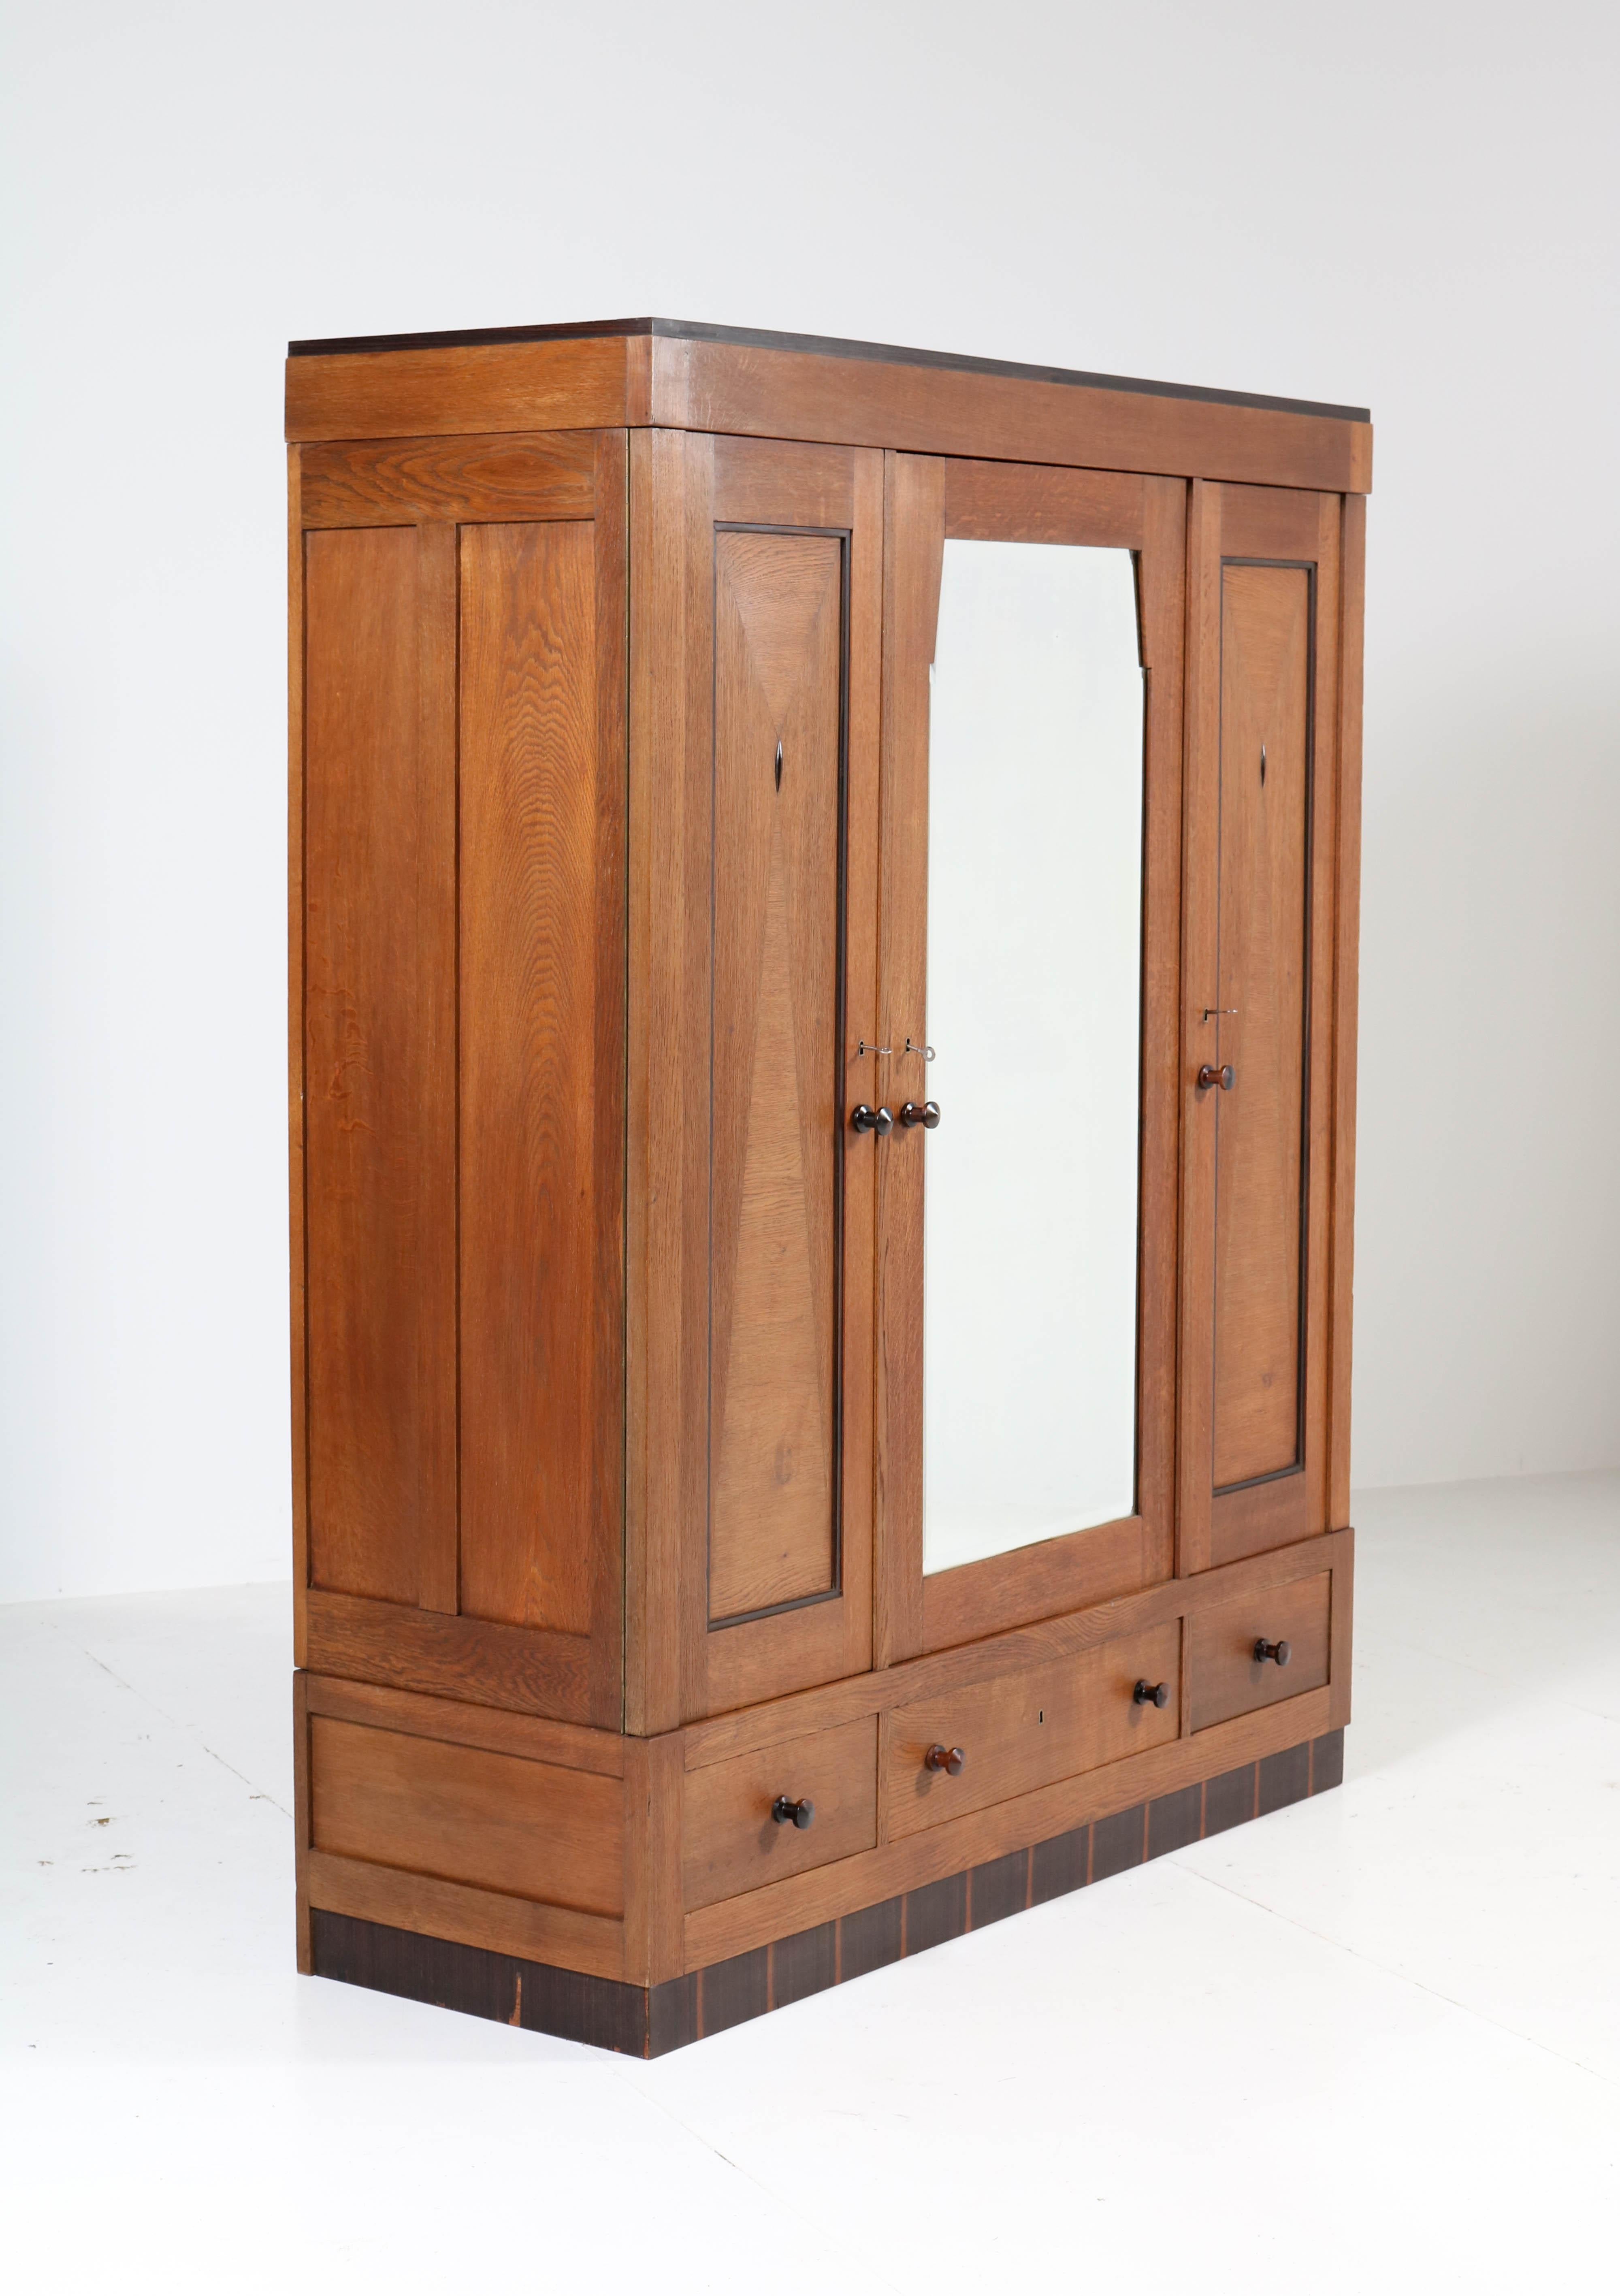 Wonderful Art Deco Haagse School wardrobe or armoir.
Striking Dutch design from the twenties.
Oak with ebony Macassar knobs and lining.
Behind the door with the original beveled mirror you will find three original
wooden shelves.
The other